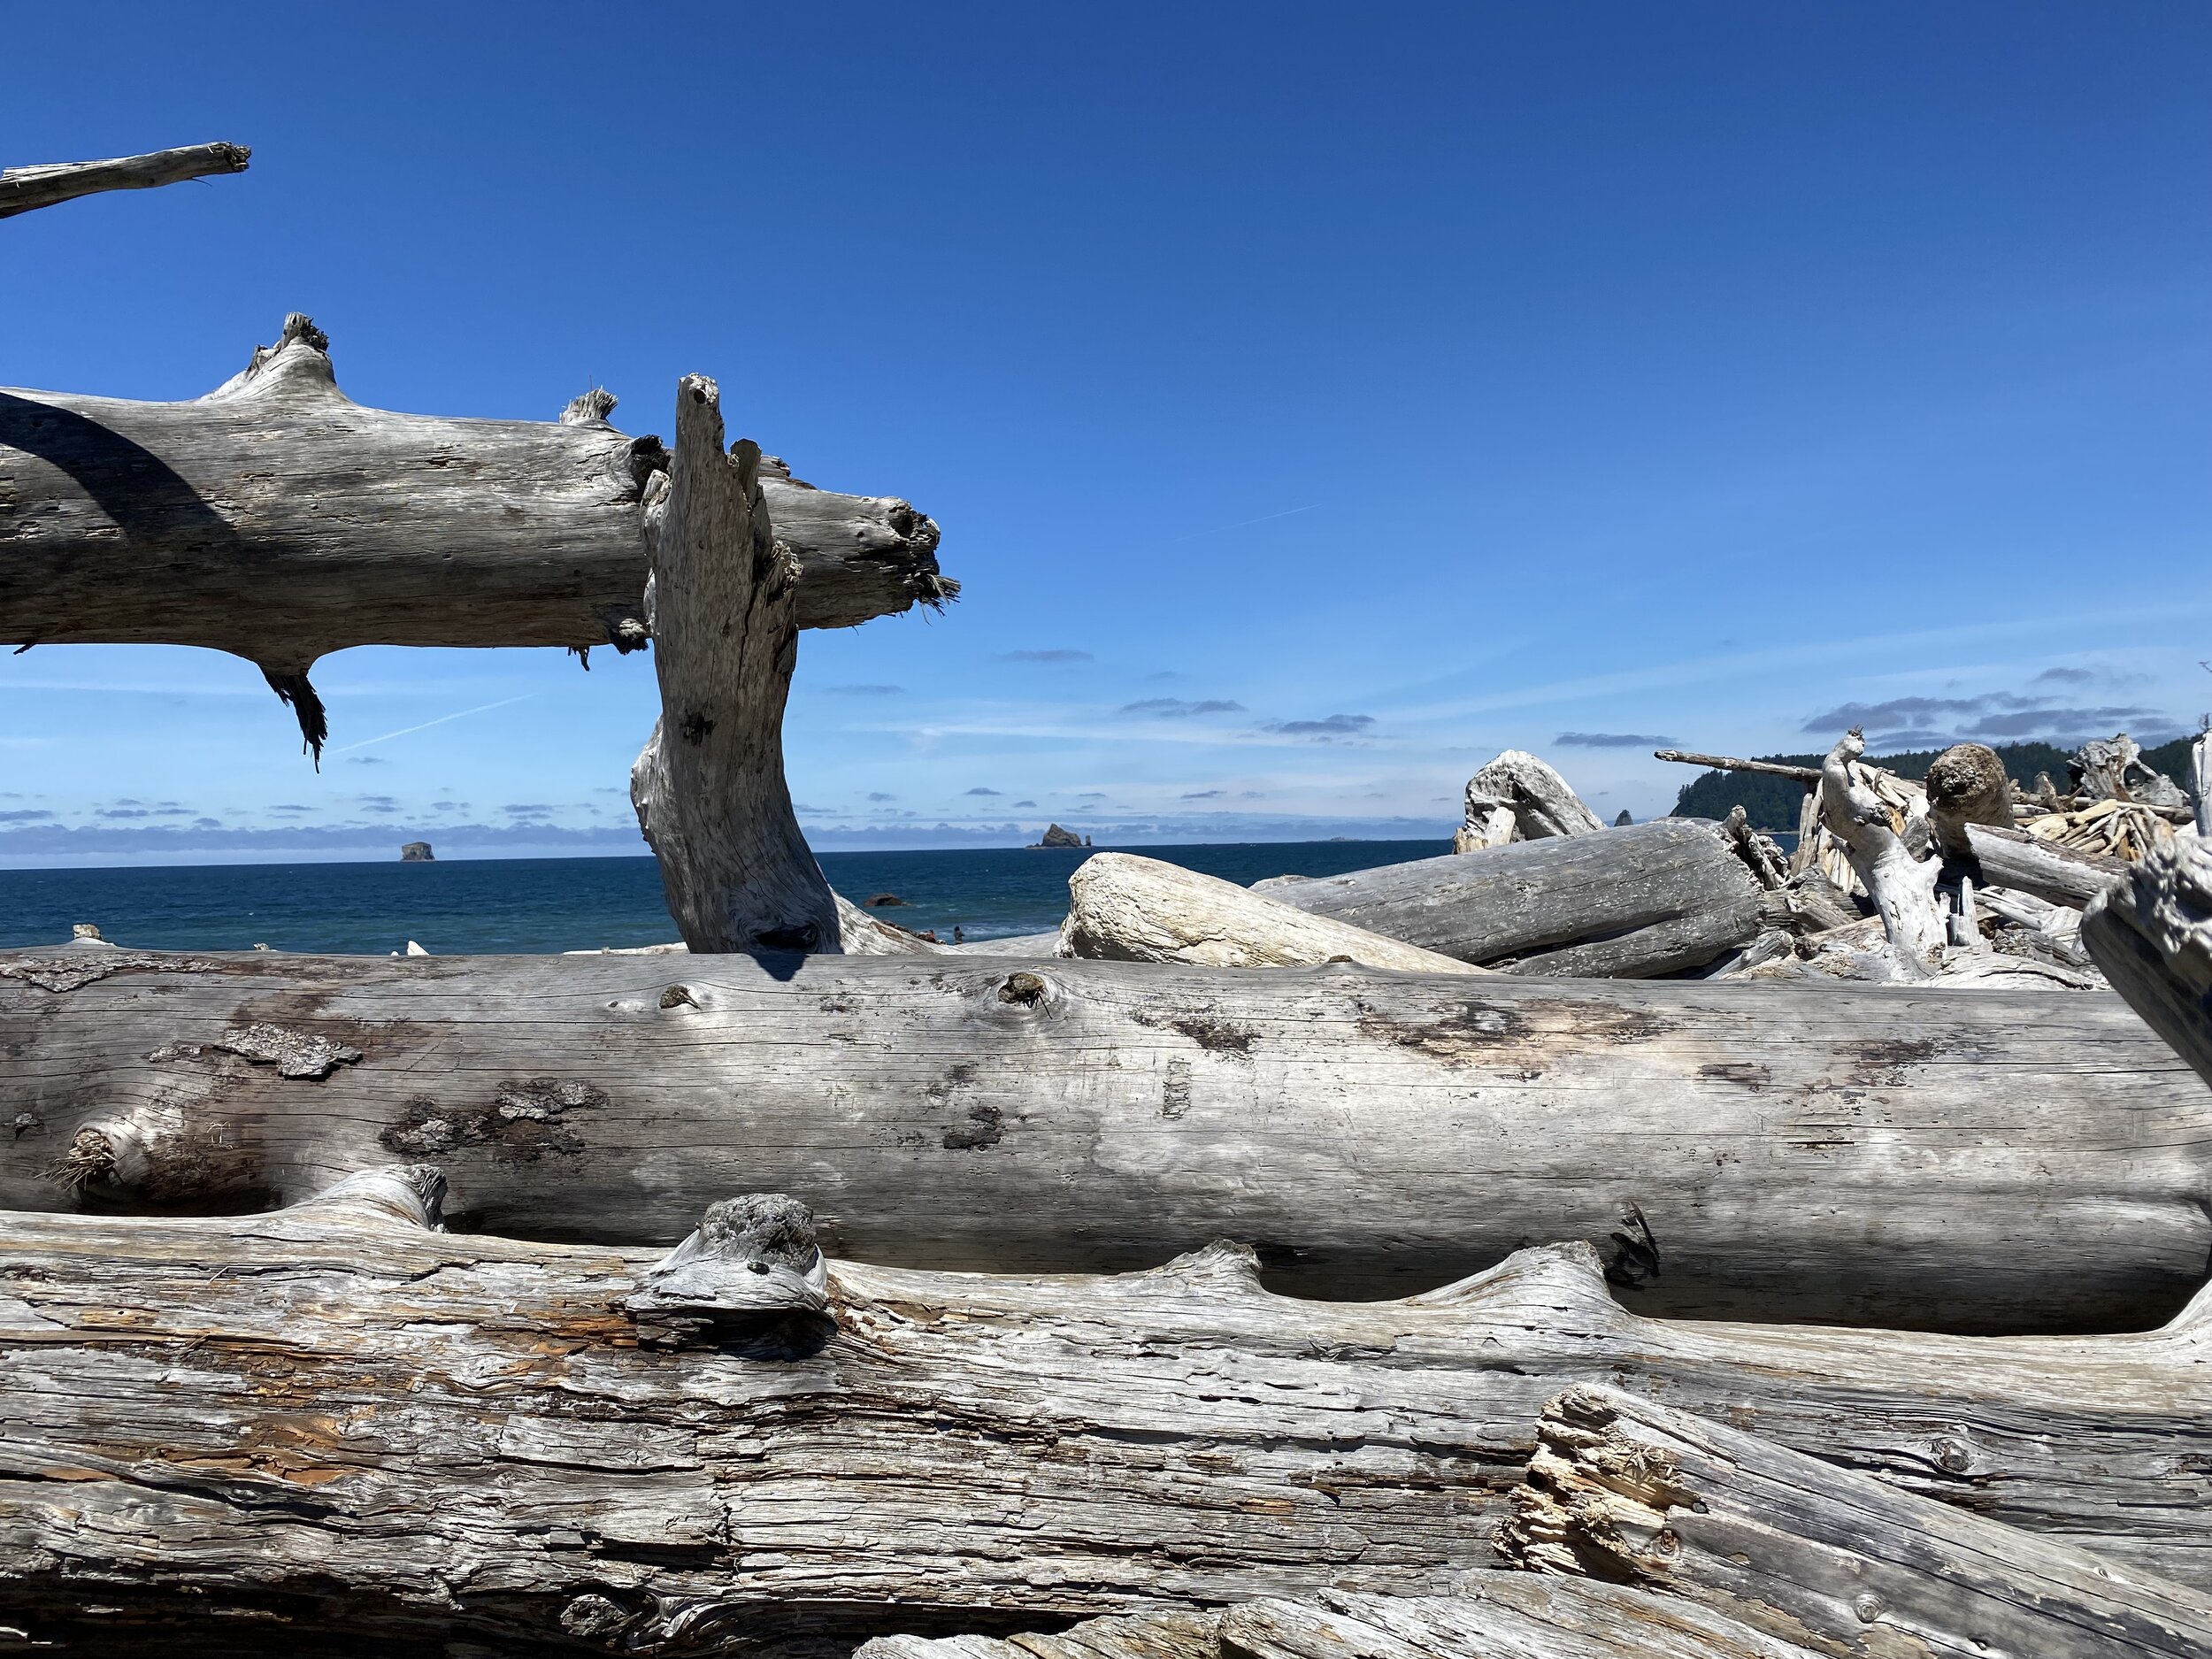 A gorgeous driftwood window frames first sights over Rialto Beach as we climb up and over.  (All photos in the reel taken by Karen Boudreaux, June 17, 2021)